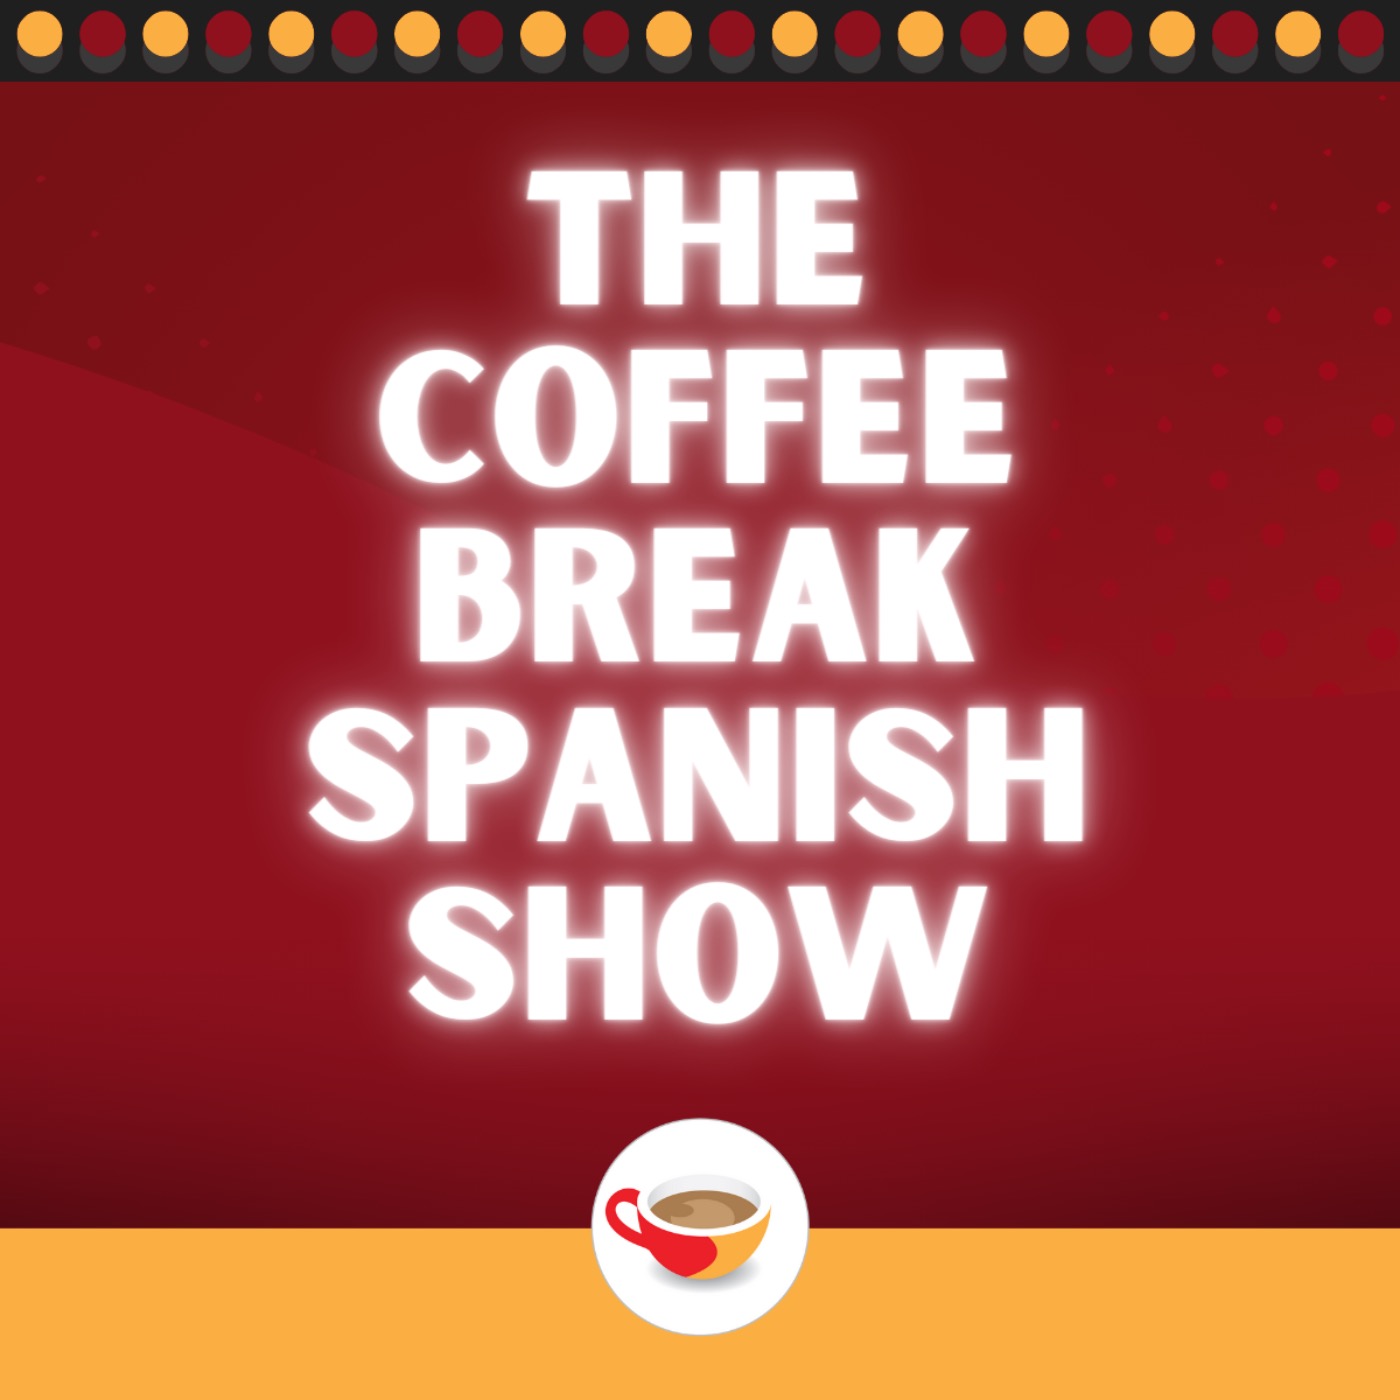 ‘Tú’ and ‘usted’ - How to navigate informal and formal Spanish | The Coffee Break Spanish Show 1.04